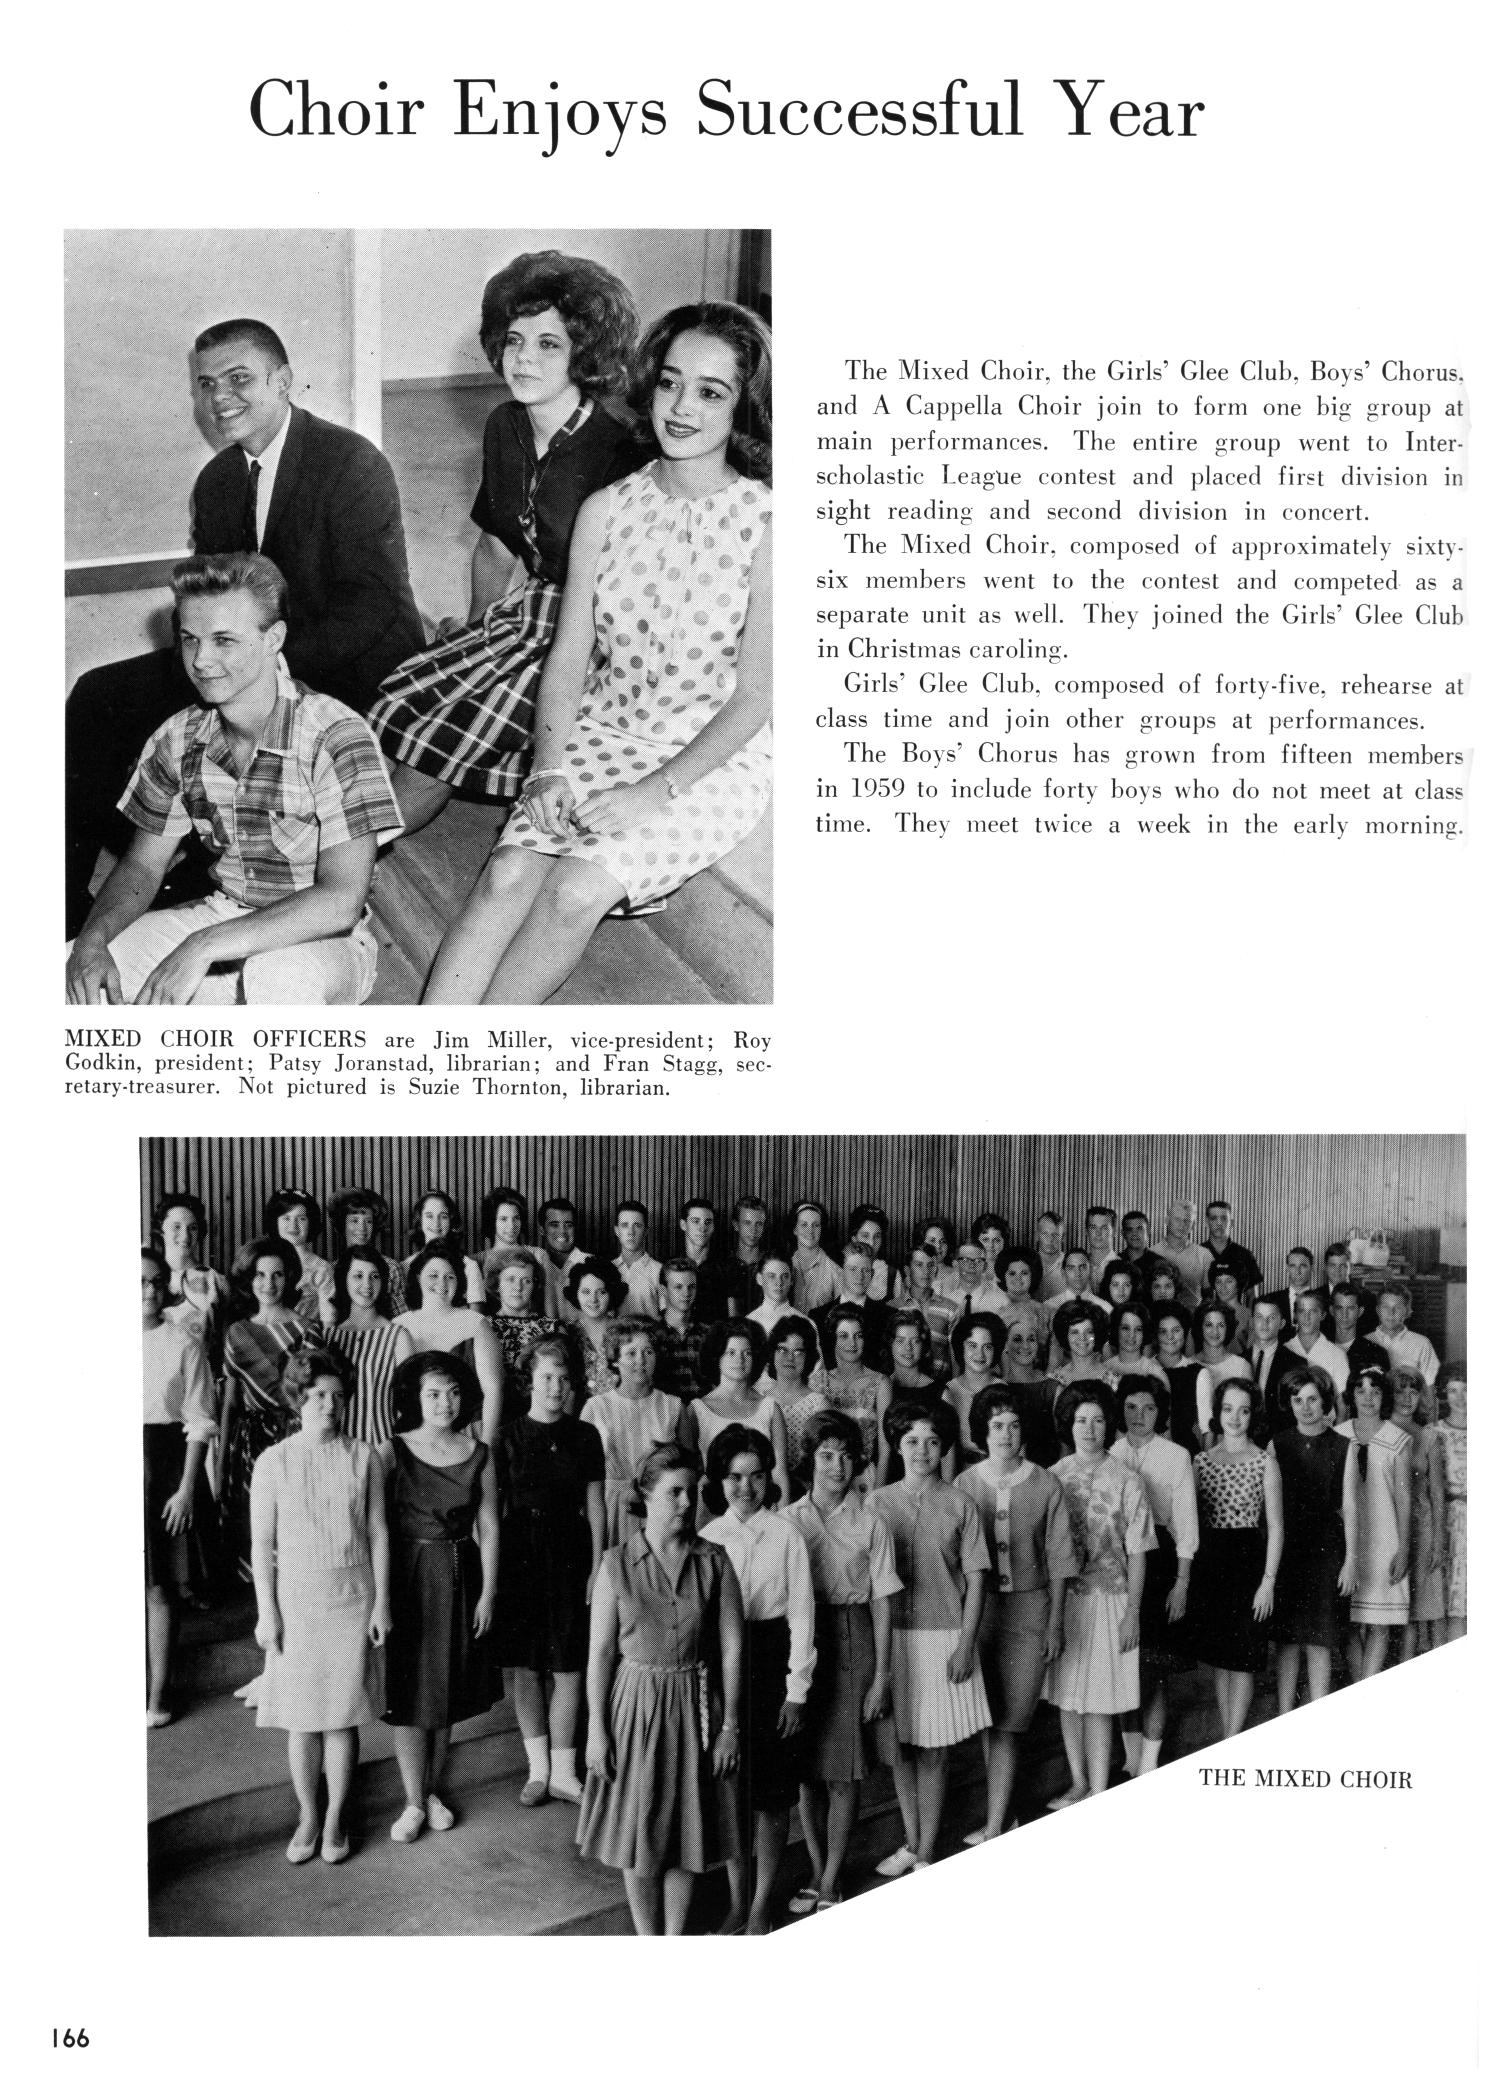 The Yellow Jacket, Yearbook of Thomas Jefferson High School, 1964
                                                
                                                    166
                                                